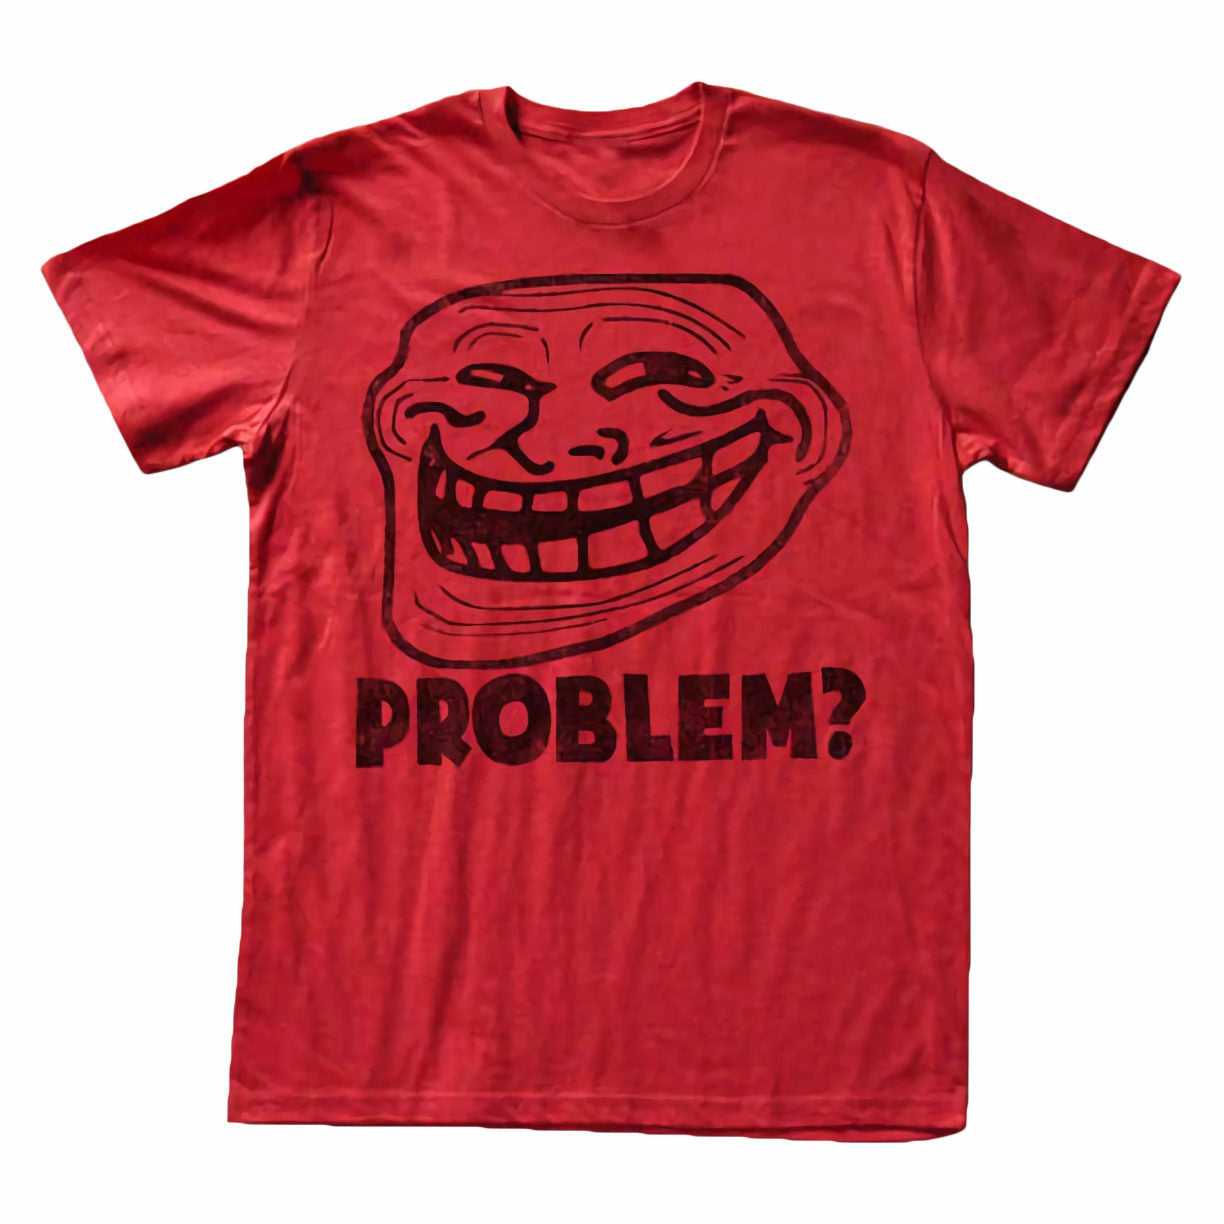 Troll Face You Mad Problem? Mens Lightweight Red T-Shirt